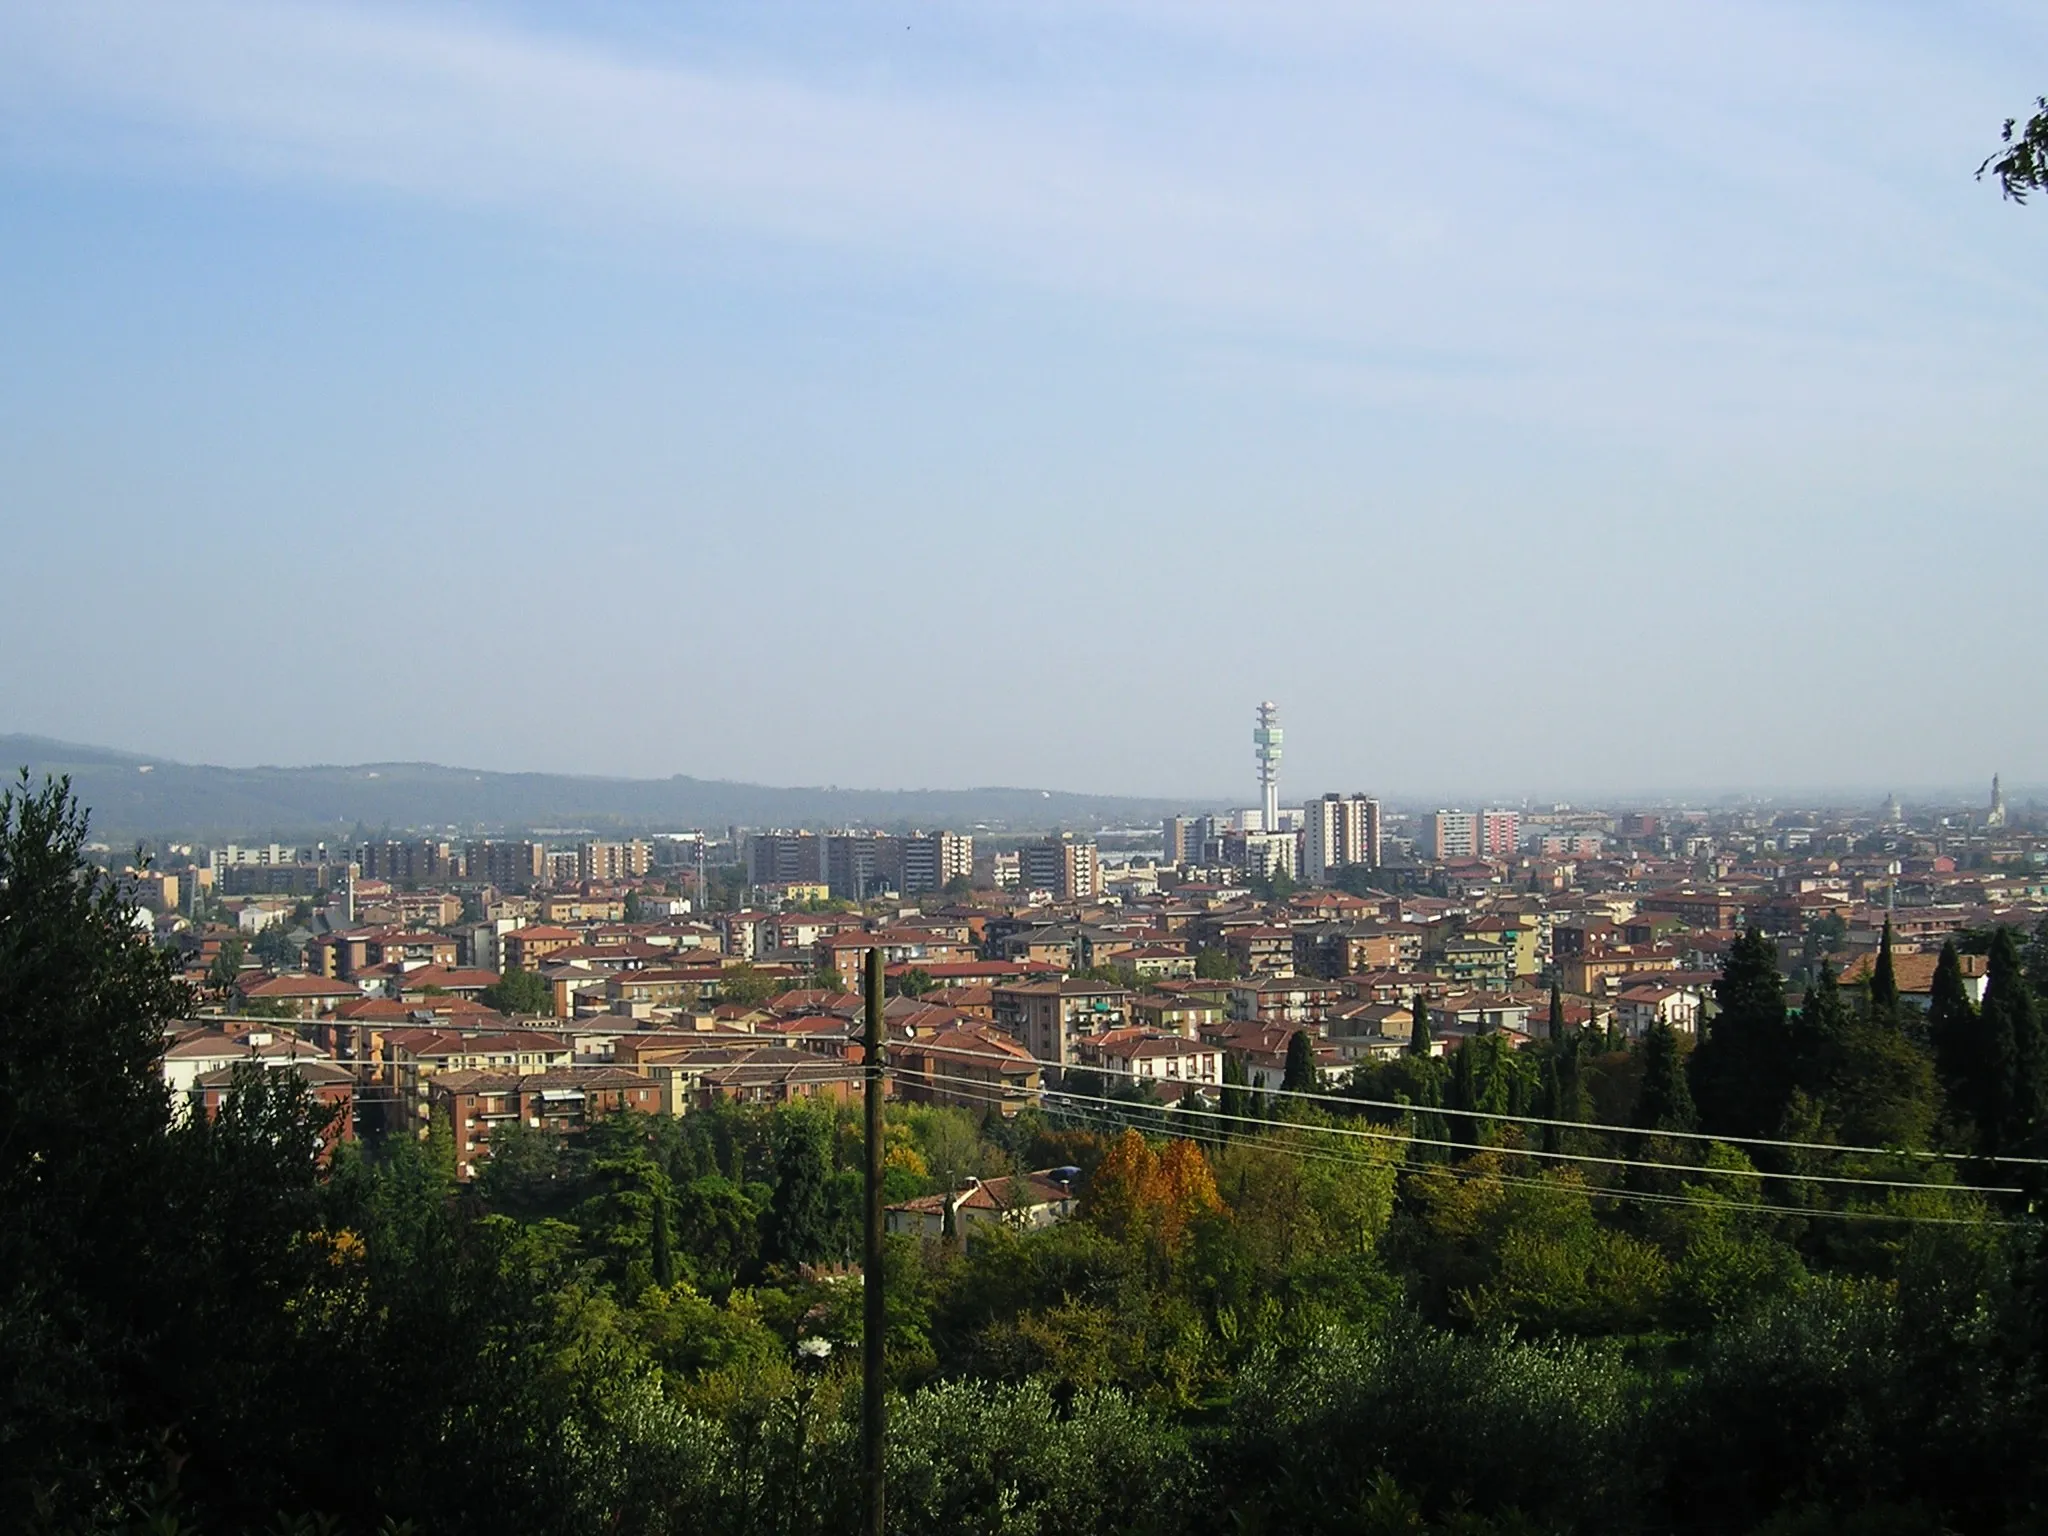 Photo showing: Verona's suburb "Borgo Venezia" seen from the top of a hill